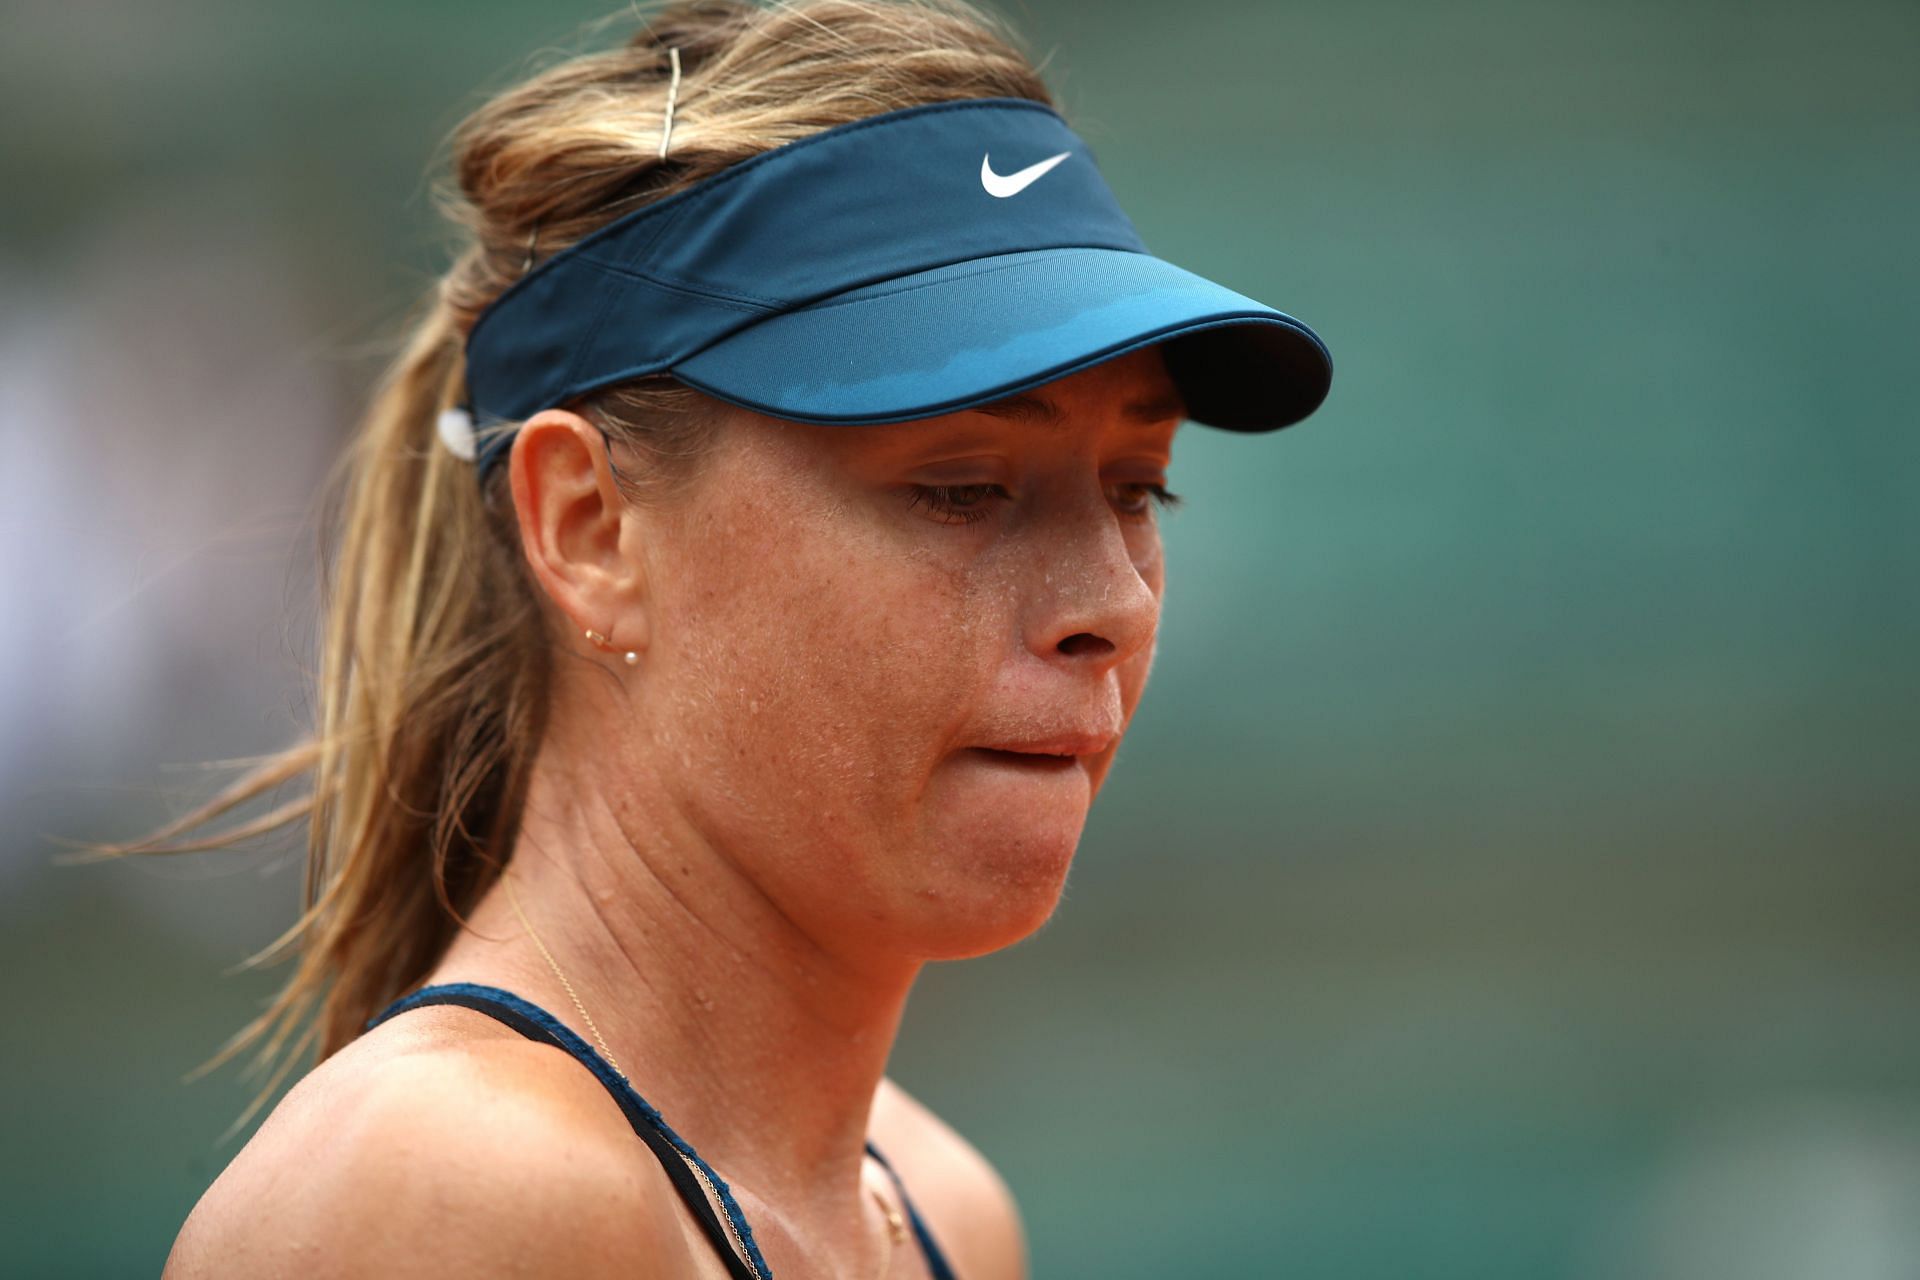 Maria Sharapova pictured at the 2018 French Open